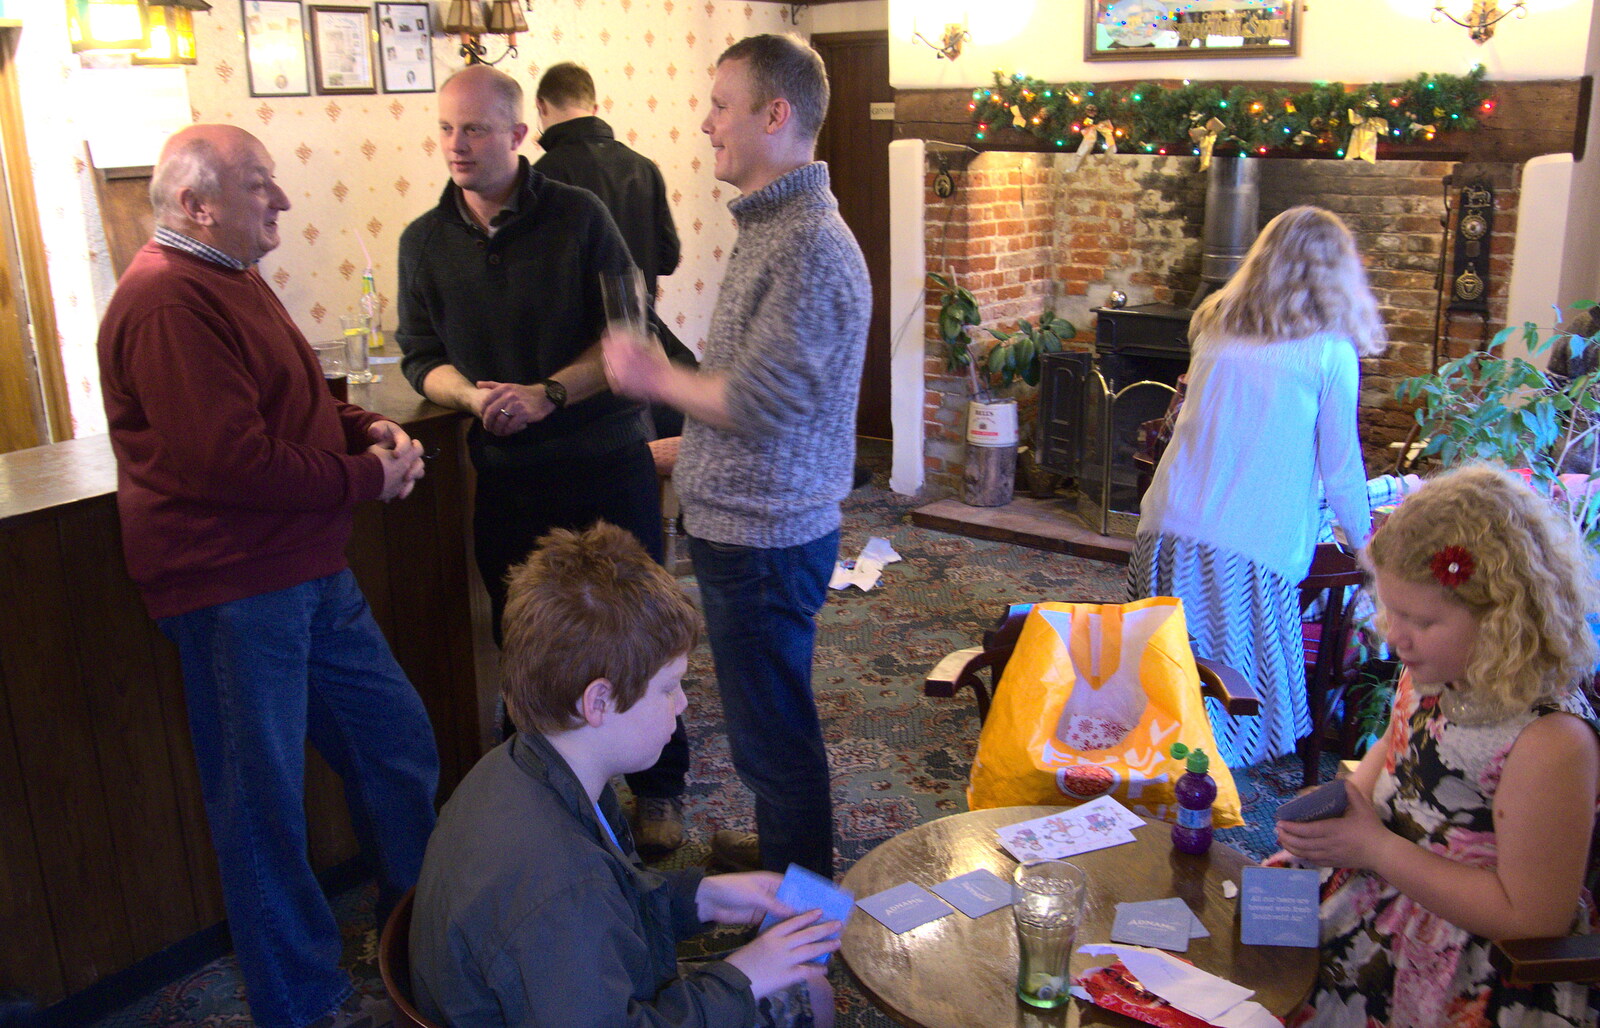 Fred and Rosie mess around with bar mats from Christmas Day and The Swan Inn, Brome, Suffolk - 25th December 2017